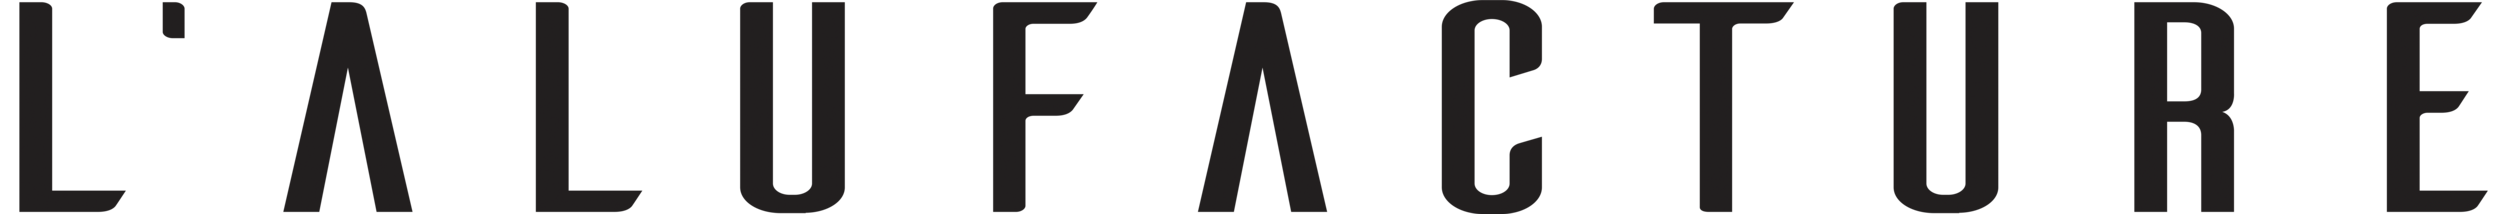 Logo Alufacture.png